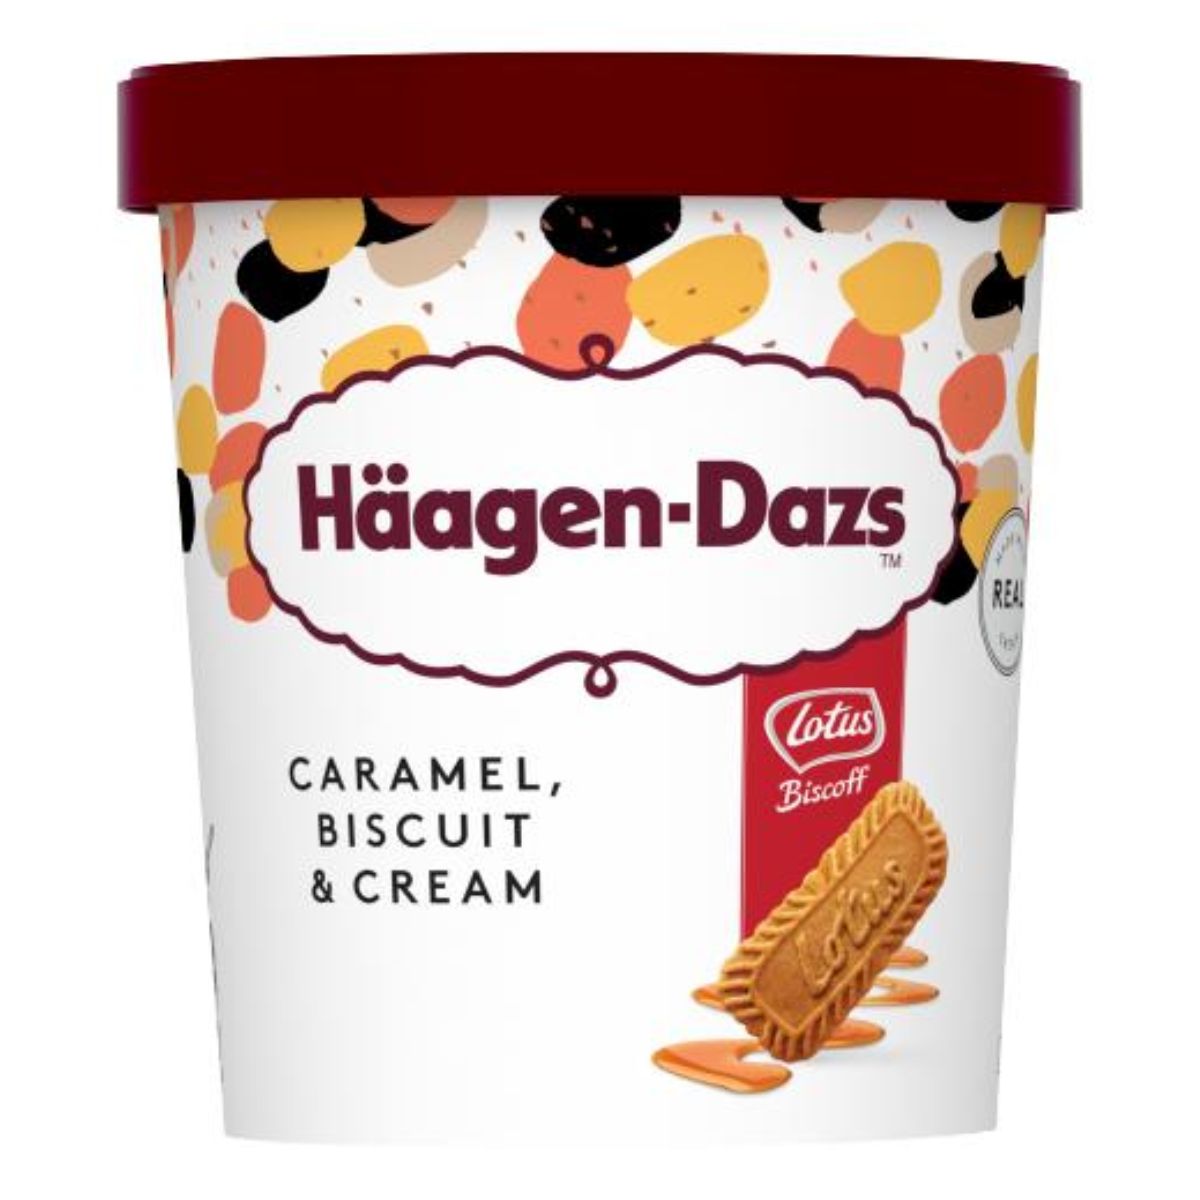 Container of Haagen Dazs - Caramel, Biscuit & Cream Ice Cream - 400g featuring a Lotus Biscoff cookie on the label.